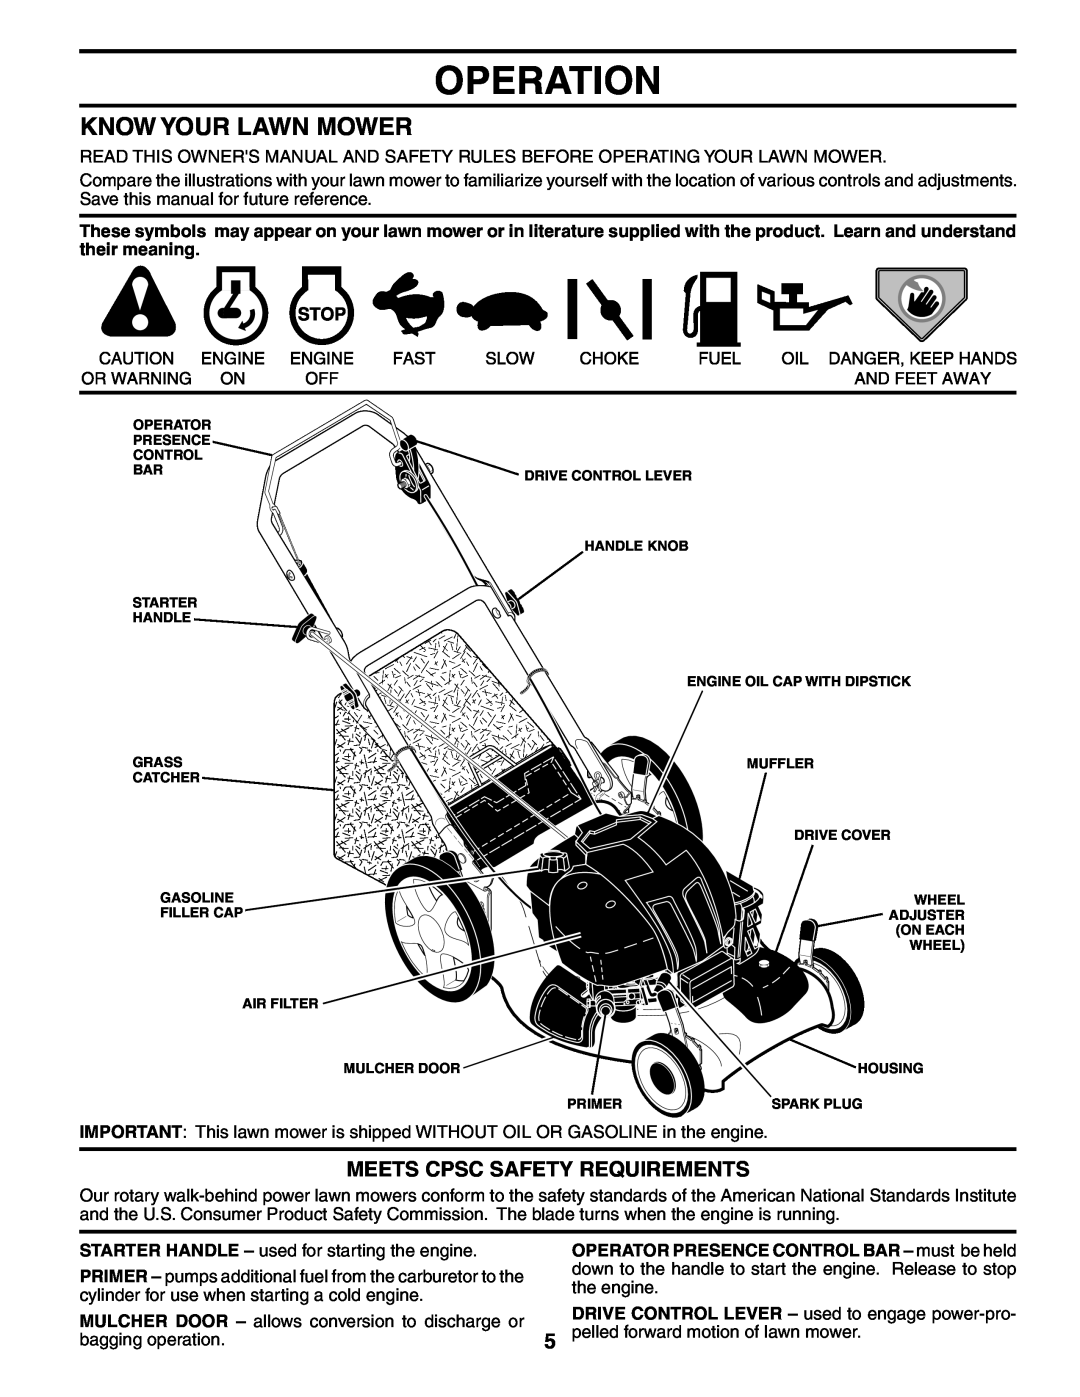 Husqvarna 7021CH1 owner manual Operation, Know Your Lawn Mower, Meets Cpsc Safety Requirements 